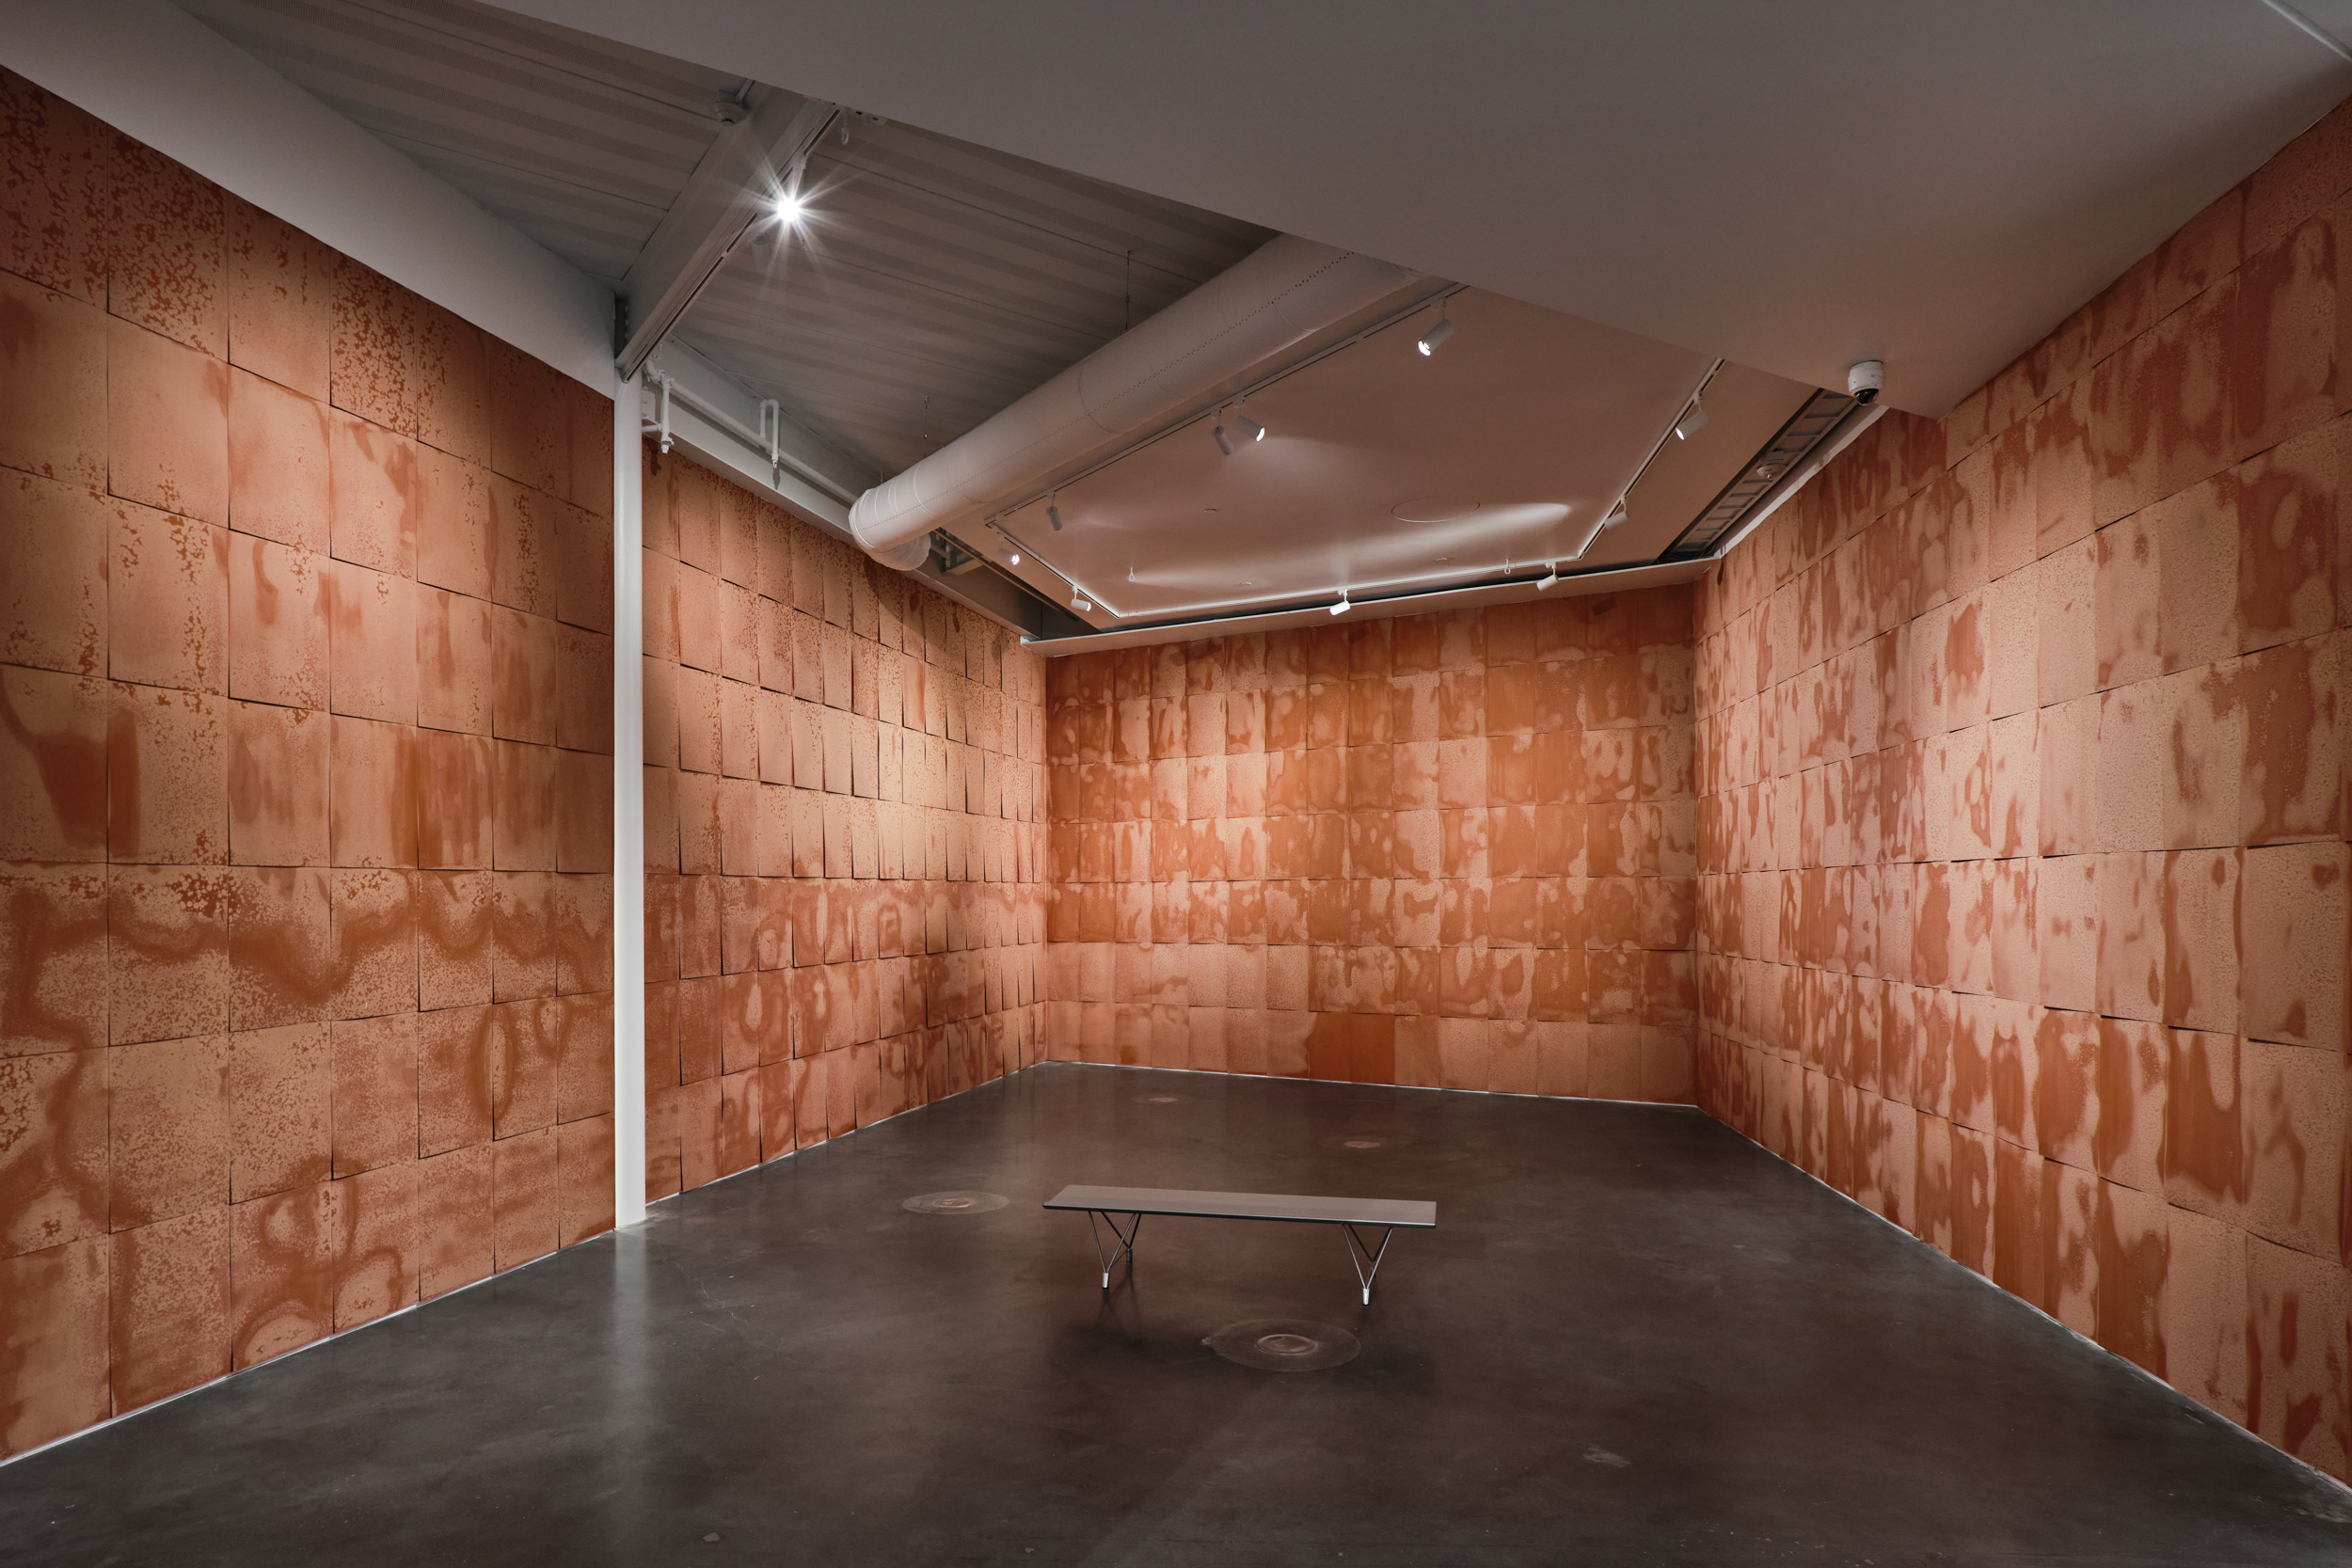 We are looking at a gallery room that is floor-to-ceiling brown streaks covering the walls. A person sits on a bench in the middle of the room.